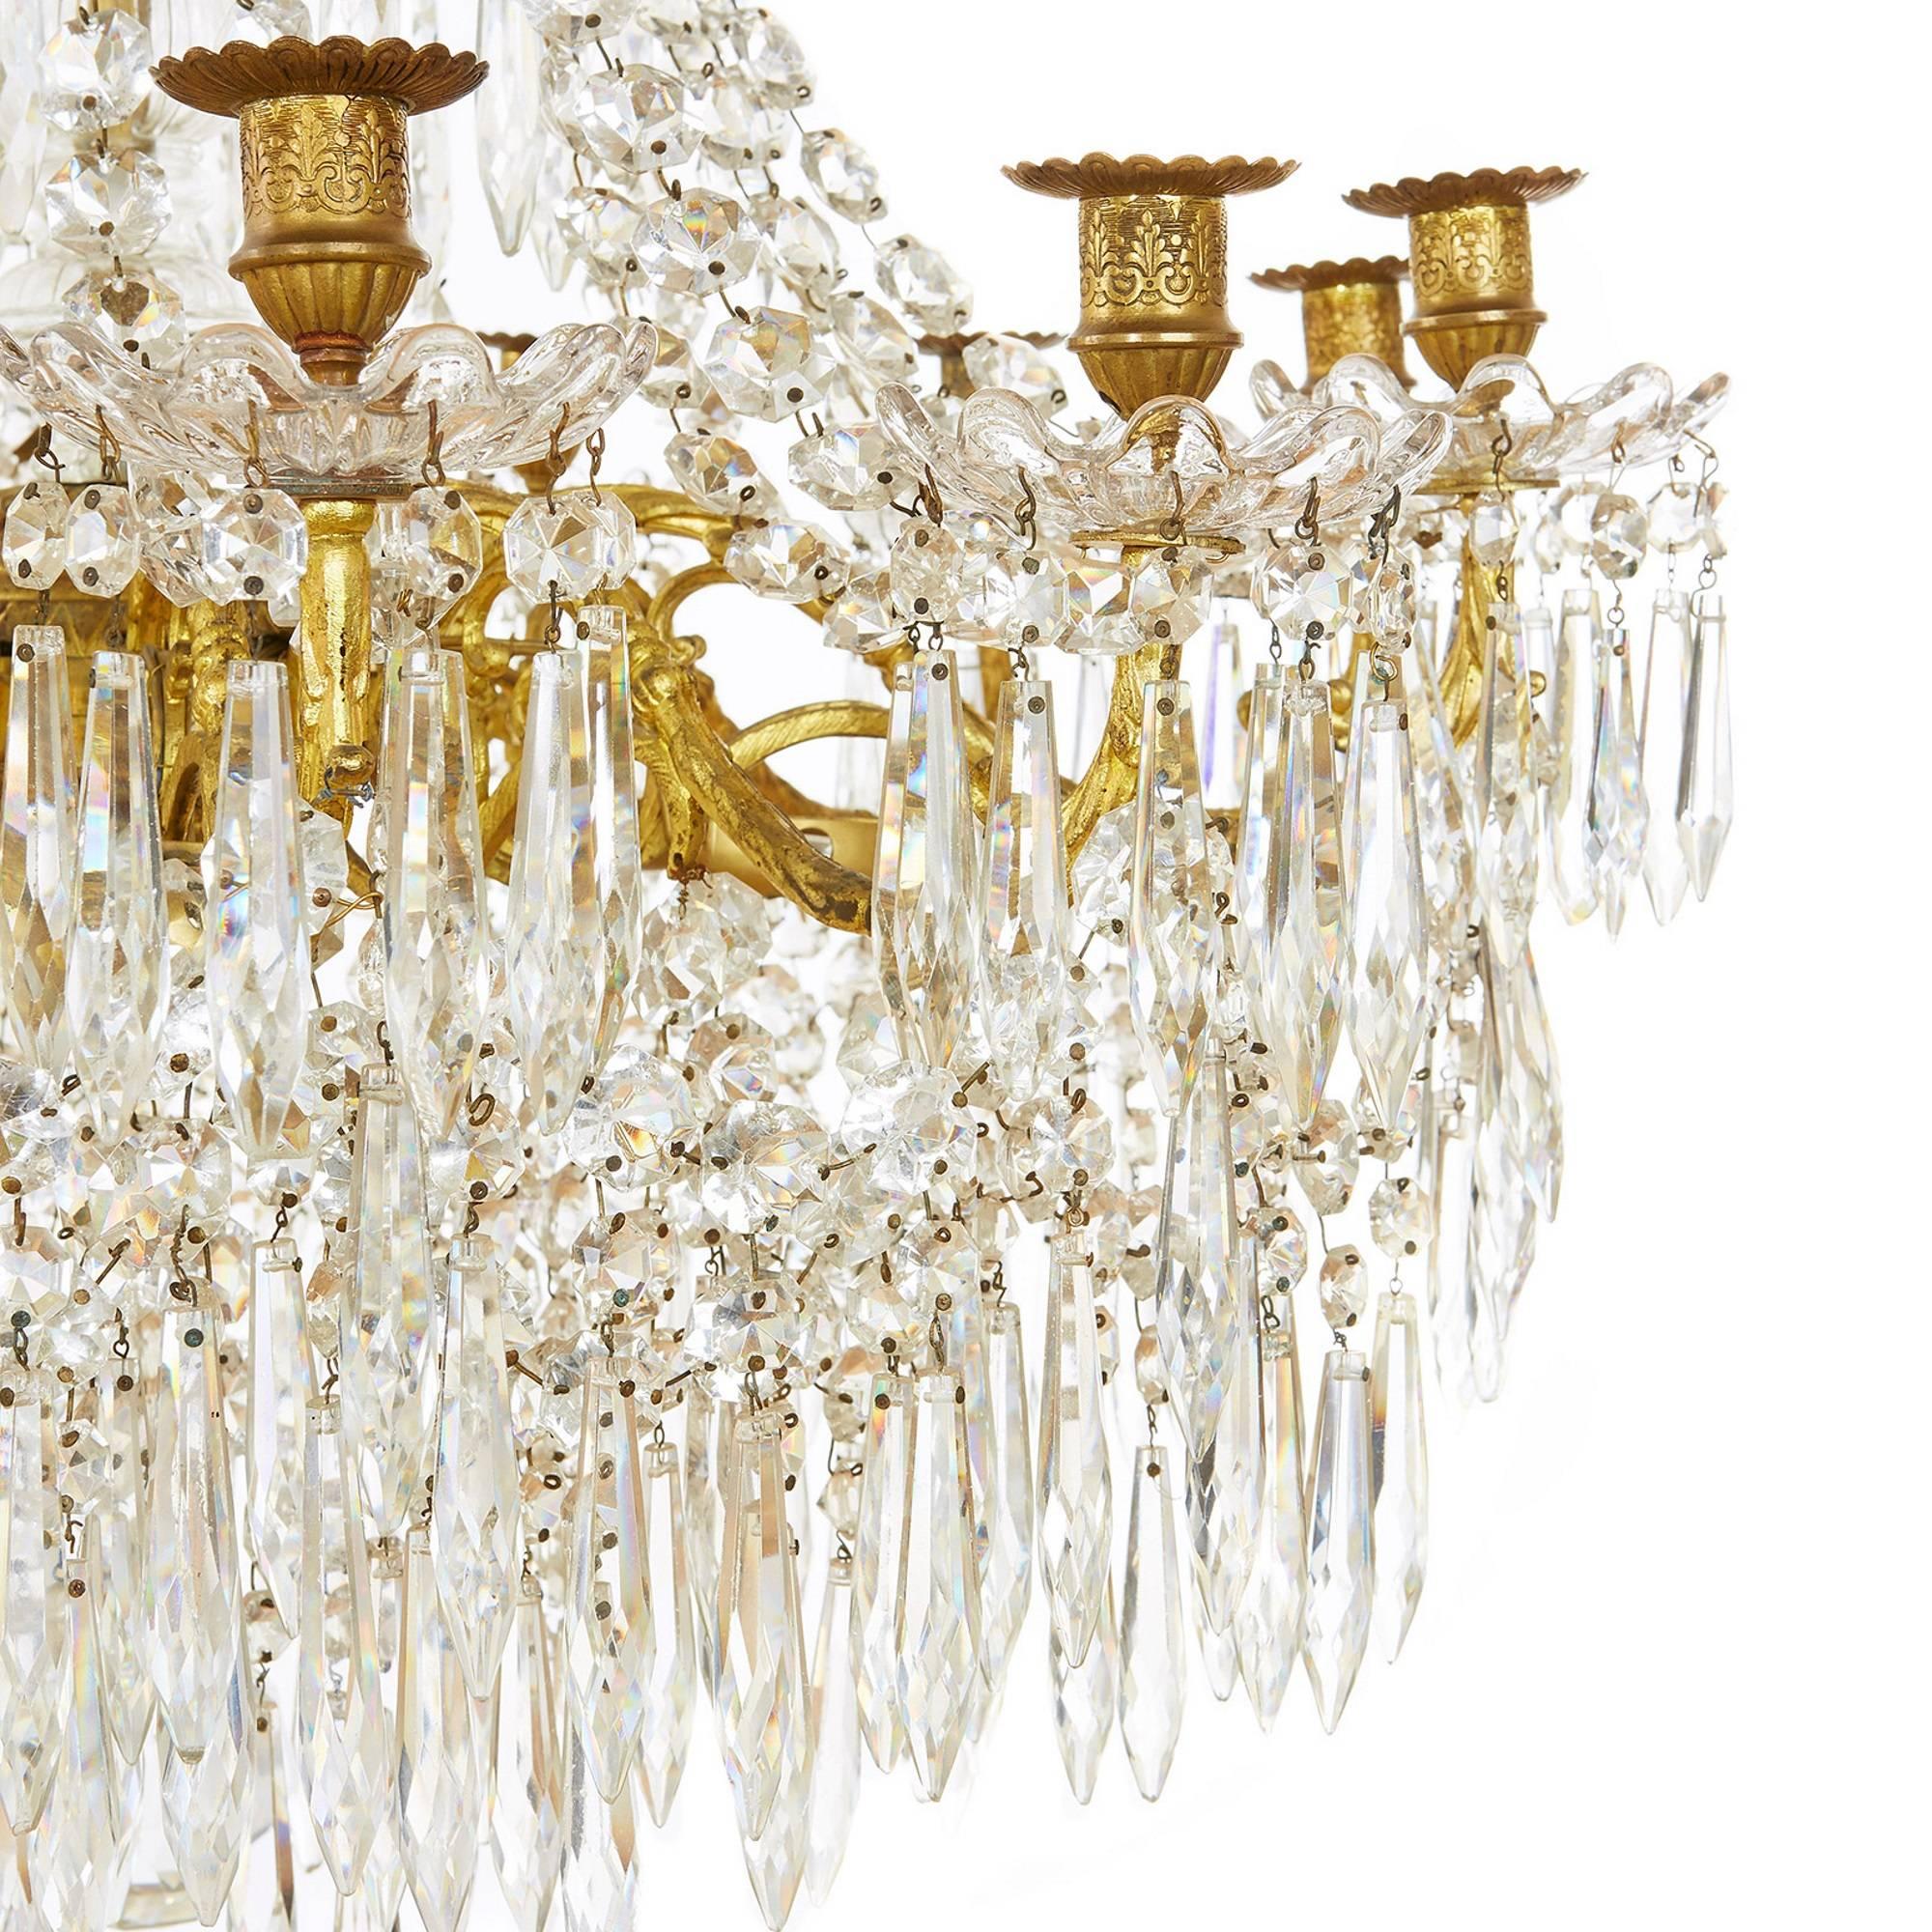 19th Century Large Gilt Bronze and Crystal Antique French Chandelier in the Empire Style